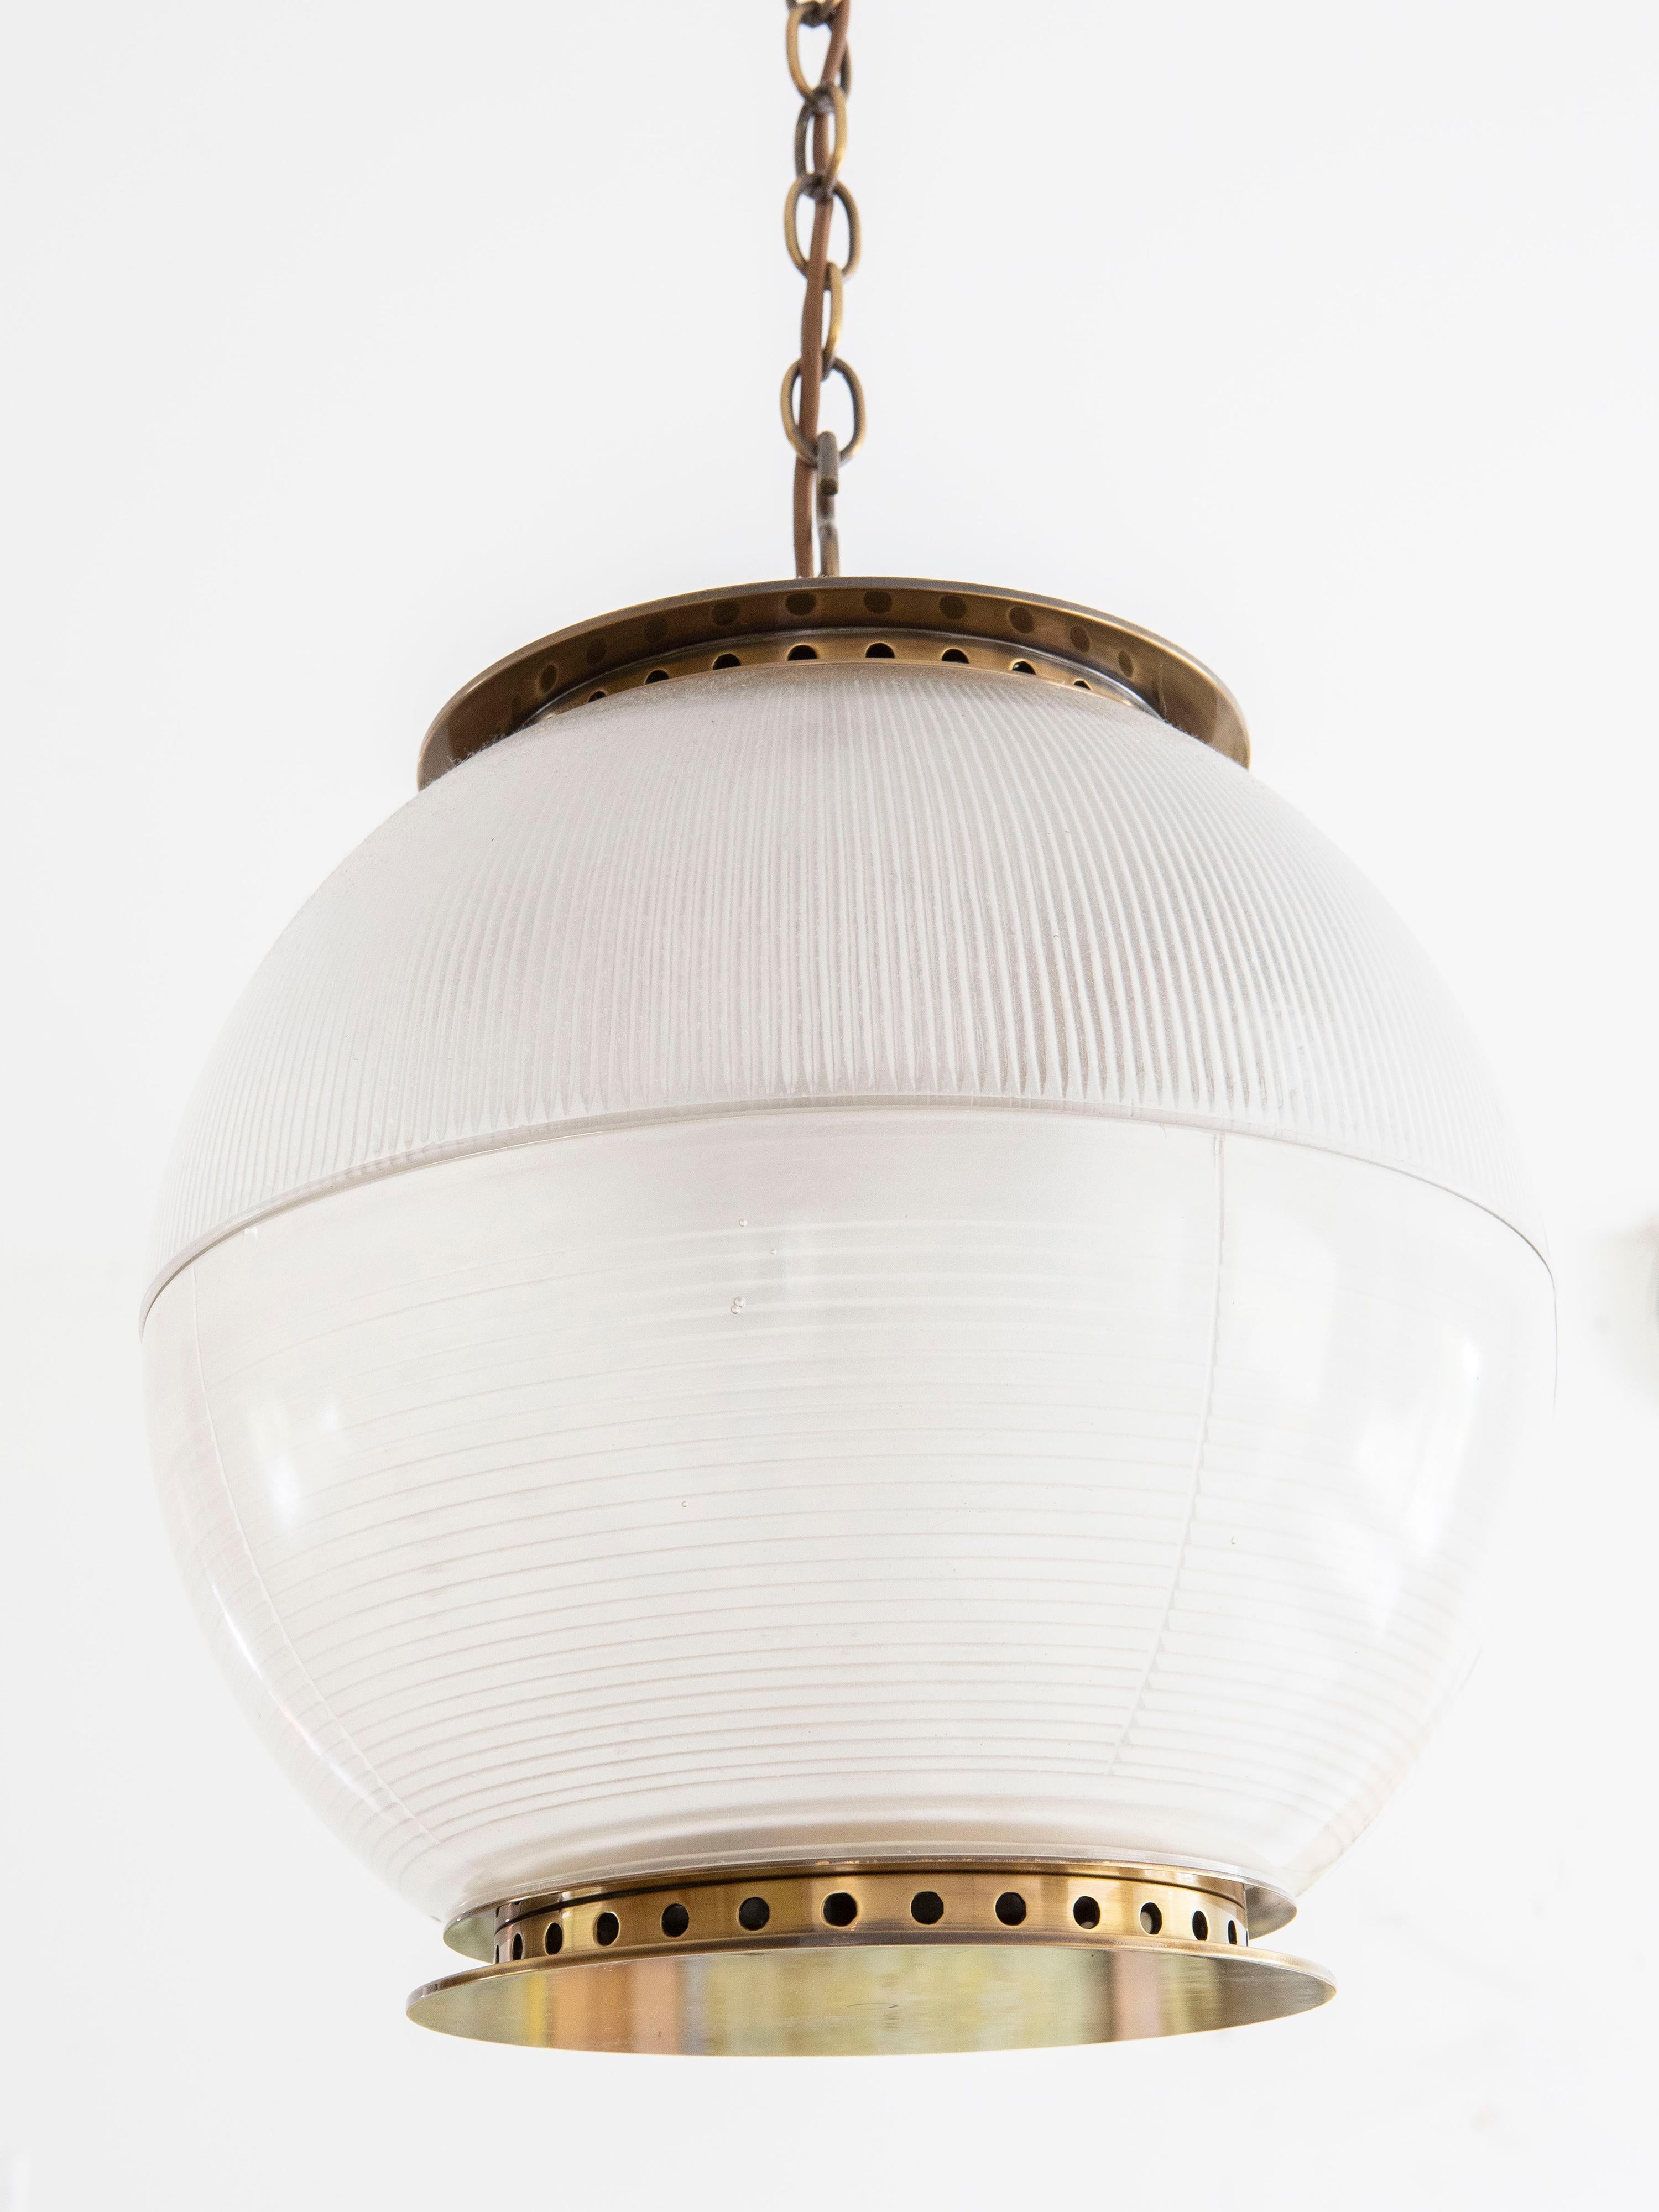 Feanor's Globe brass and opaque glass pendant by Hector Finch. The prismatic glass helps disguise low-energy / LED bulbs. Ideal for kitchens, halls and landings. Wired for USA. Lamping: 3 sockets, 40W max per socket. 38